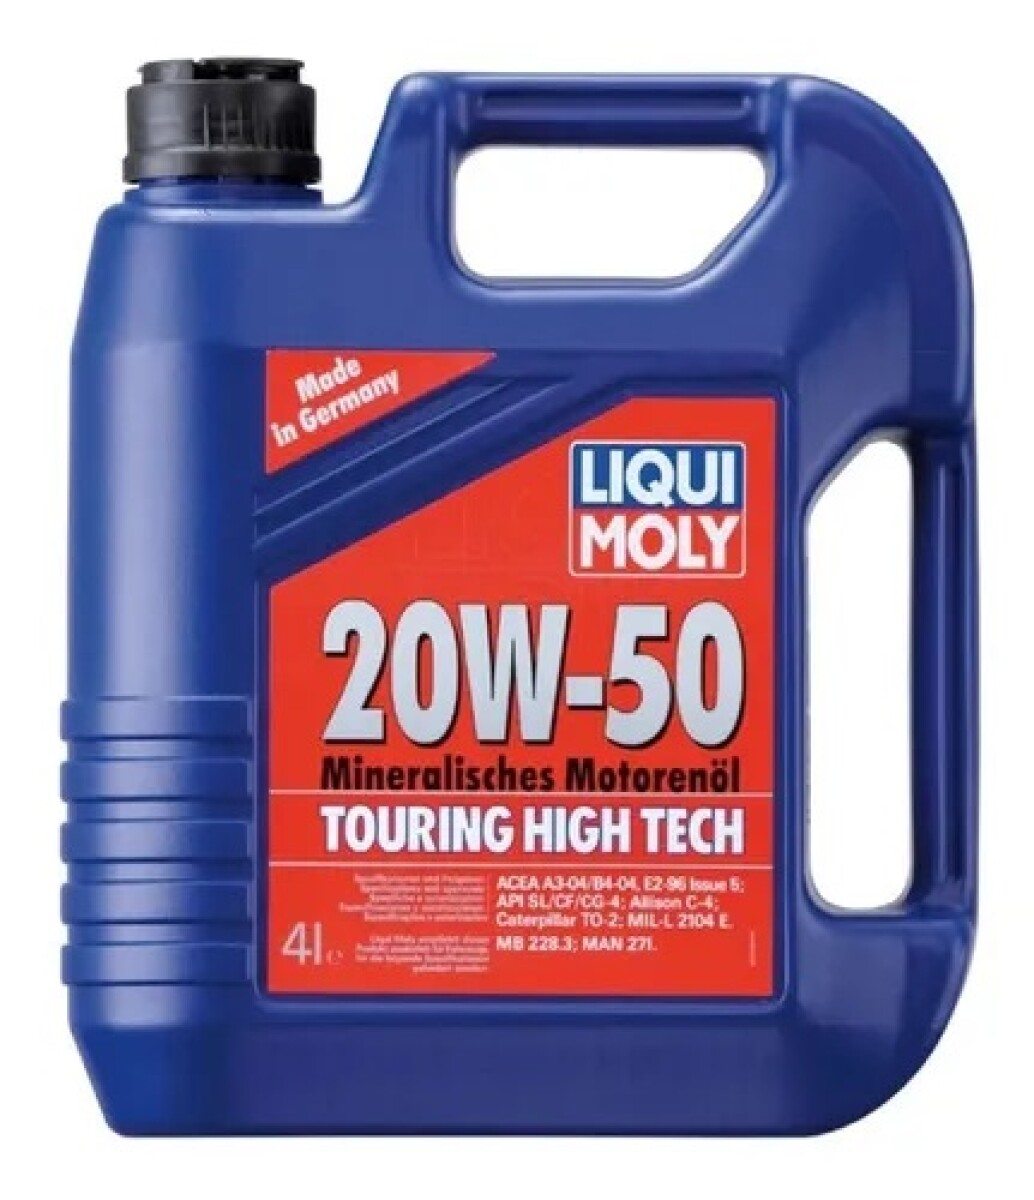 LIQUIMOLY MINERAL TOURING 20W50 4LTS 